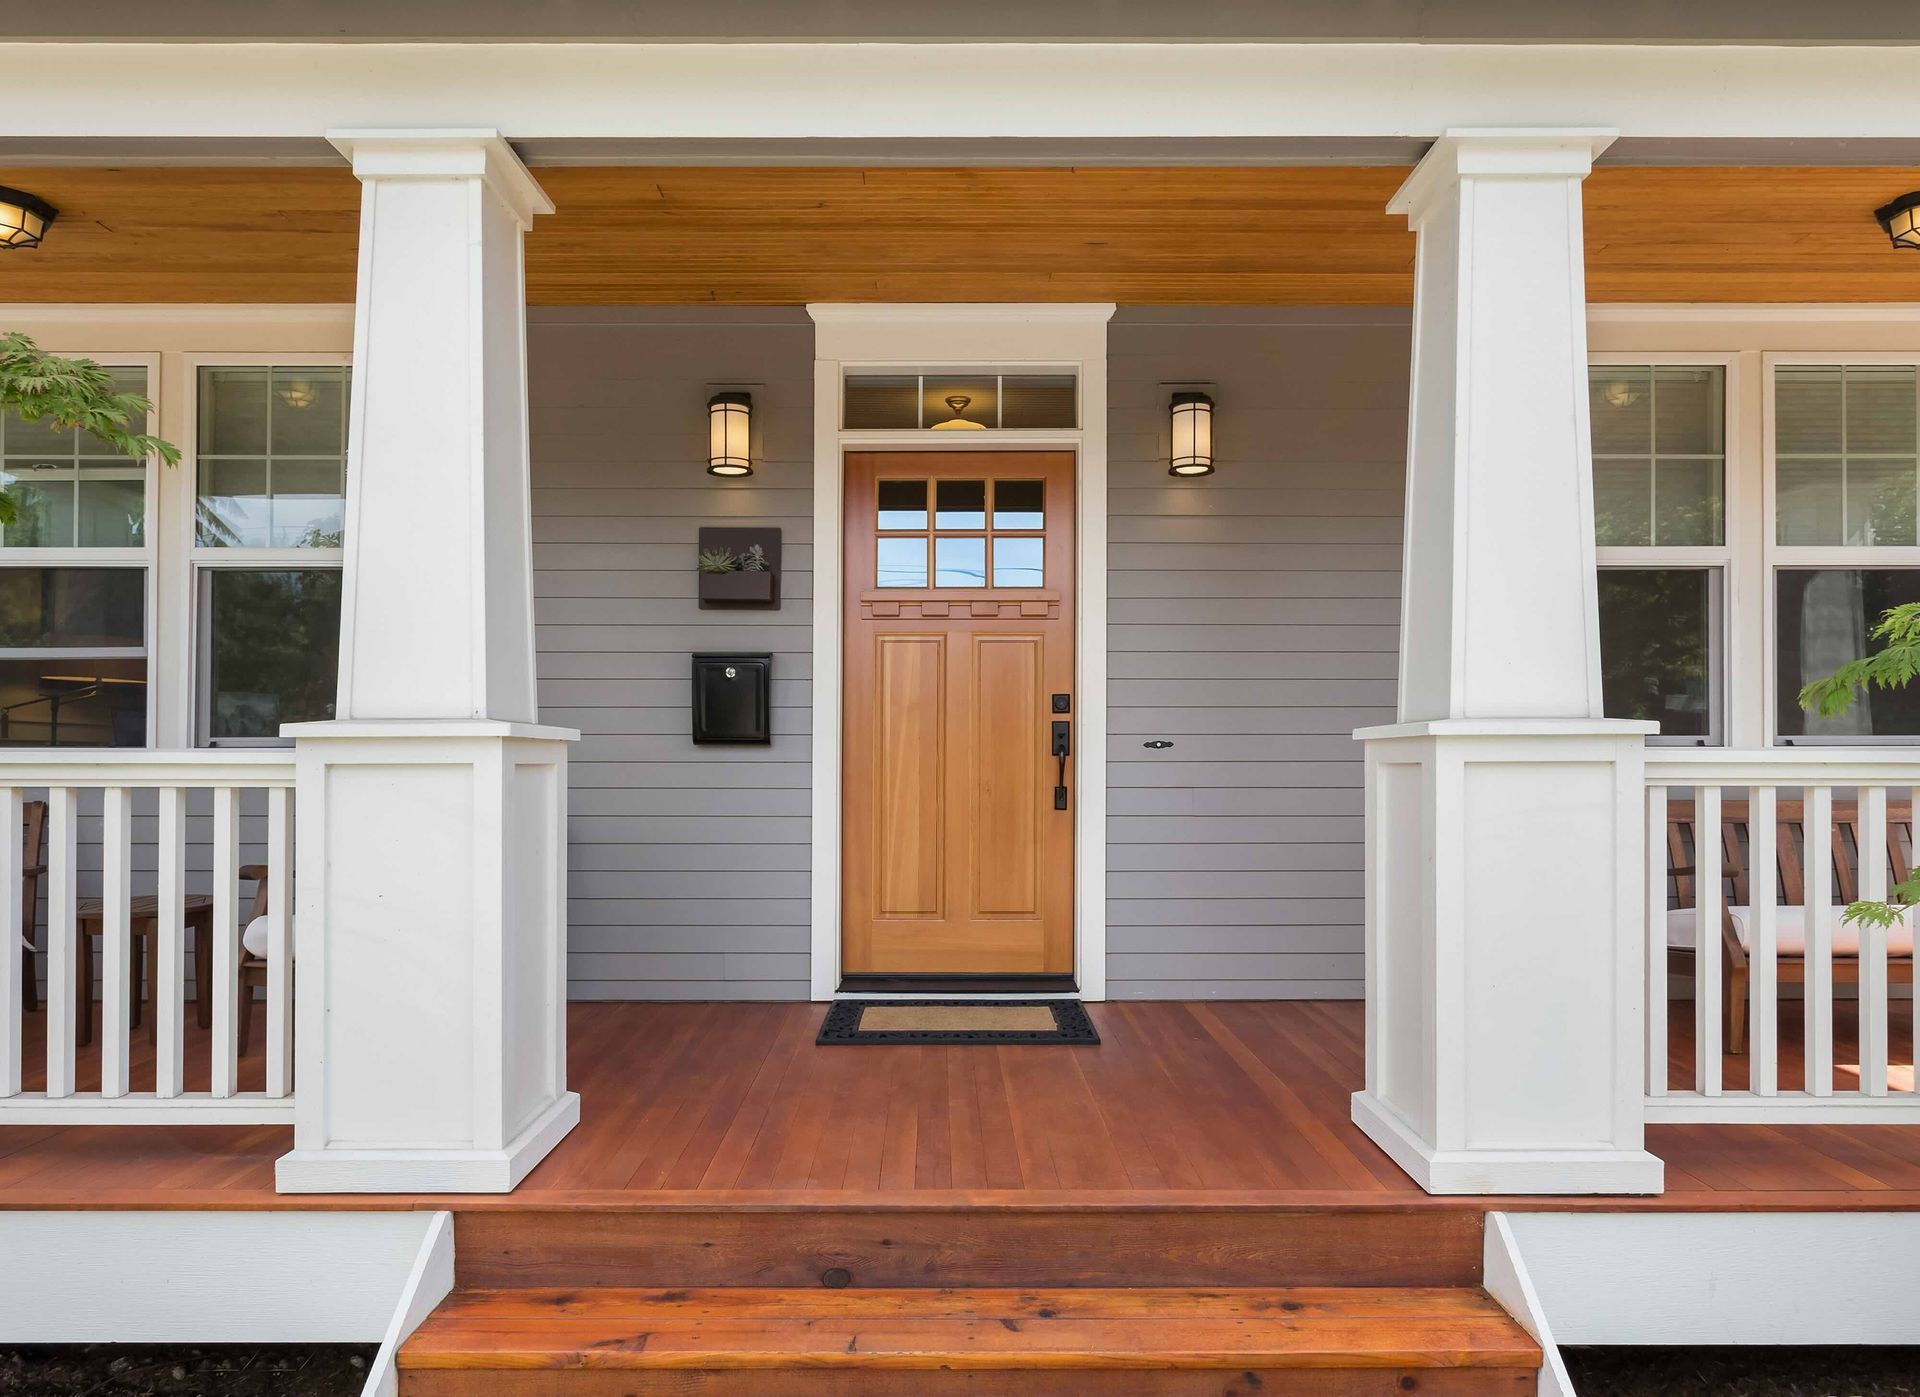 the front porch of a house with a wooden door and white pillars .